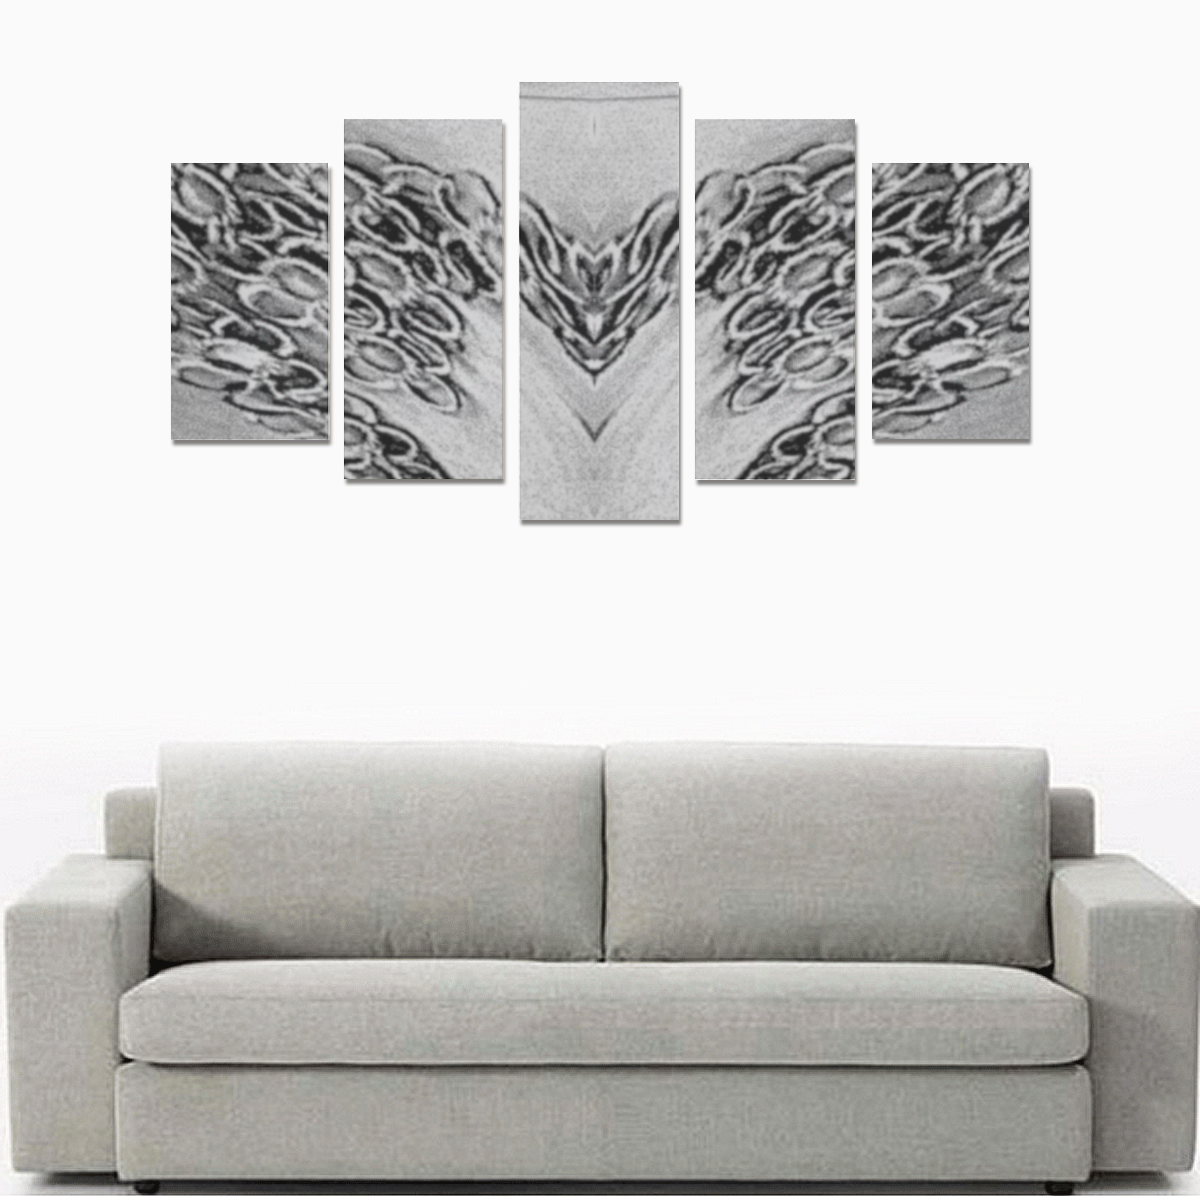 wings of calm and love Canvas Print Sets A (No Frame)